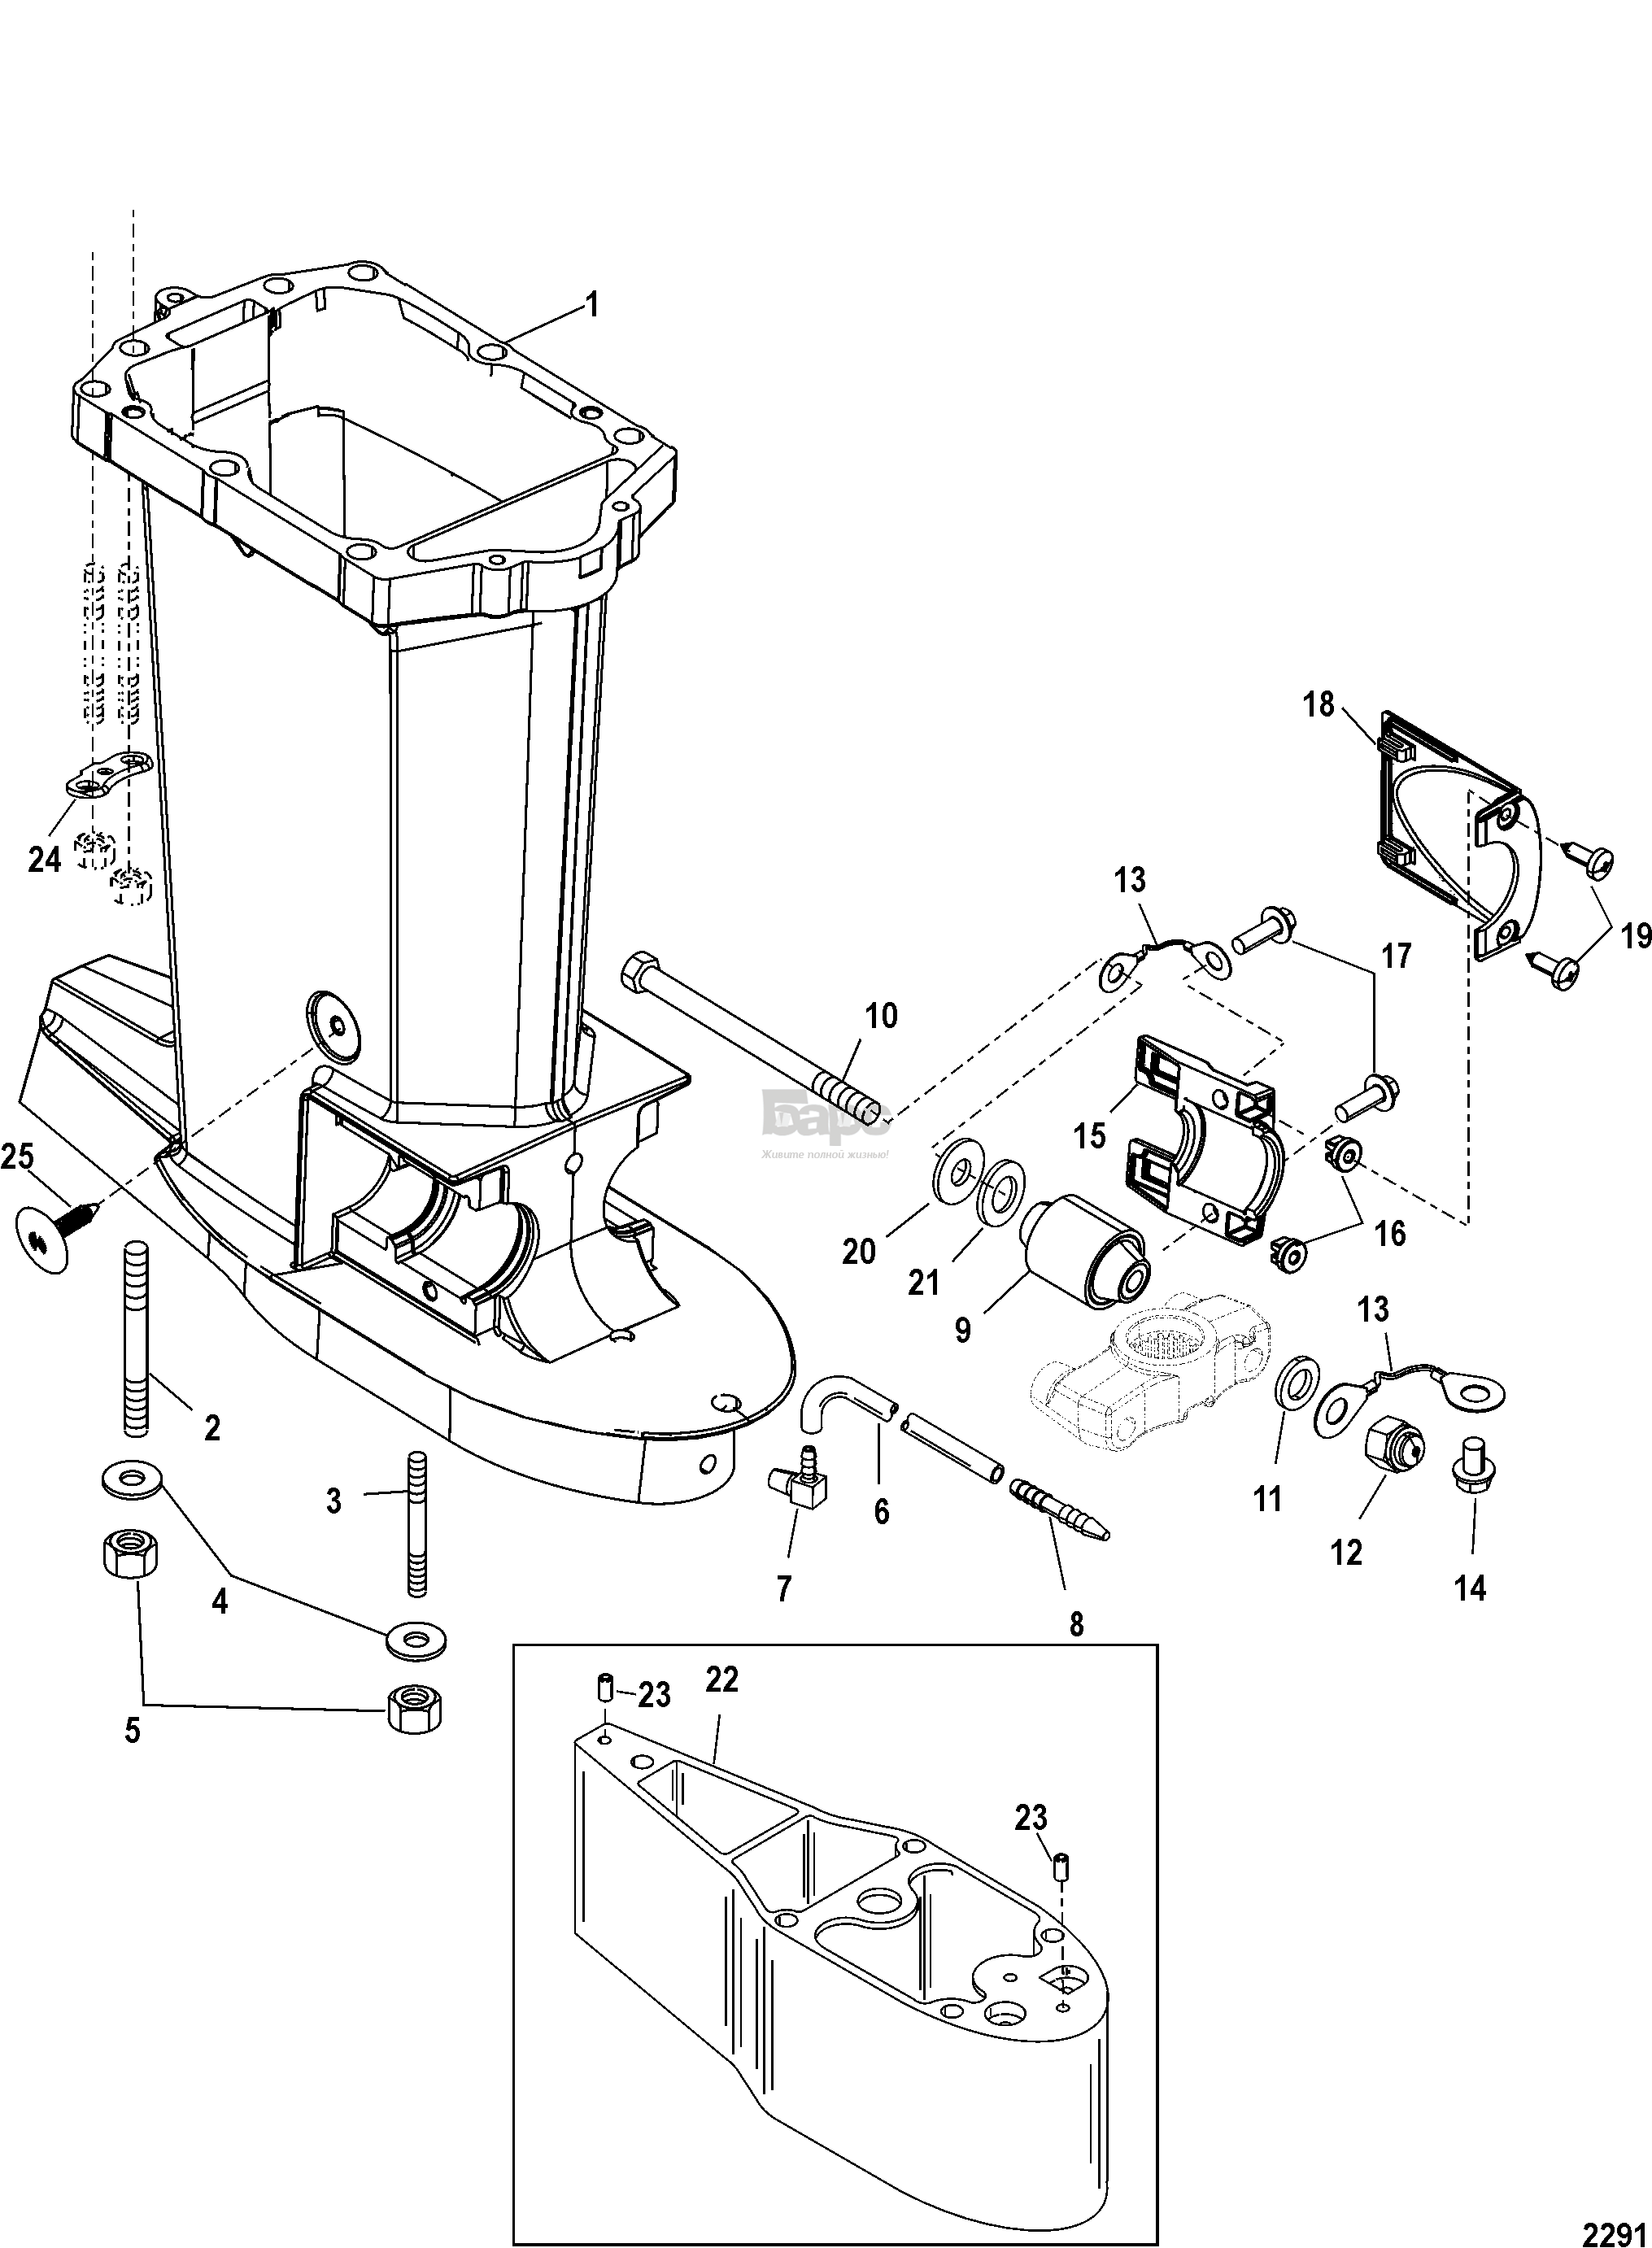 Driveshaft Housing, USA-0T801000/ BEL-0P268000 and Up